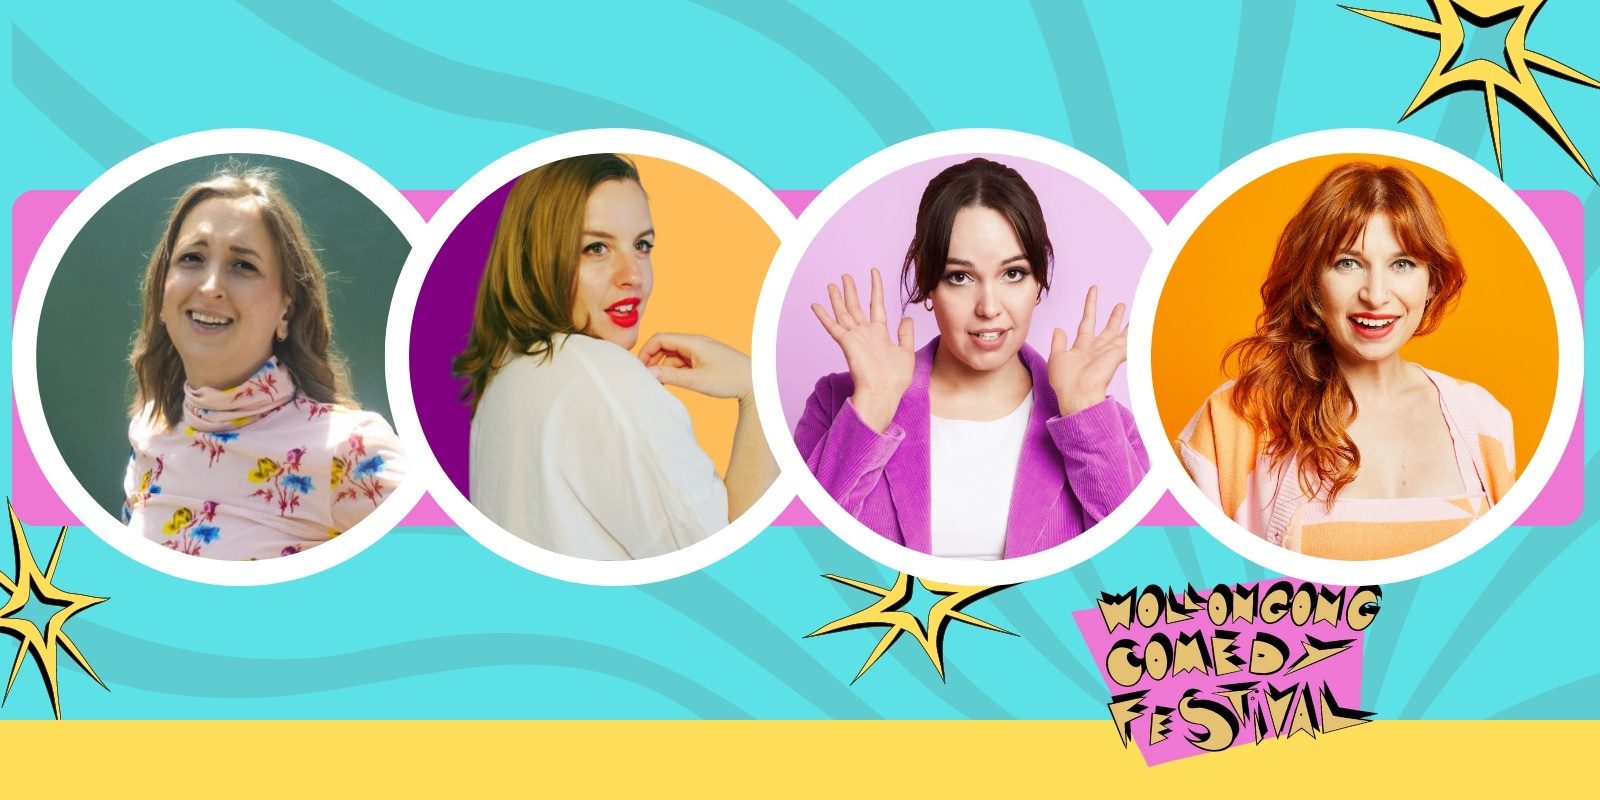 Banner image for Wollongong Comedy Festival Women's Comedy Showcase